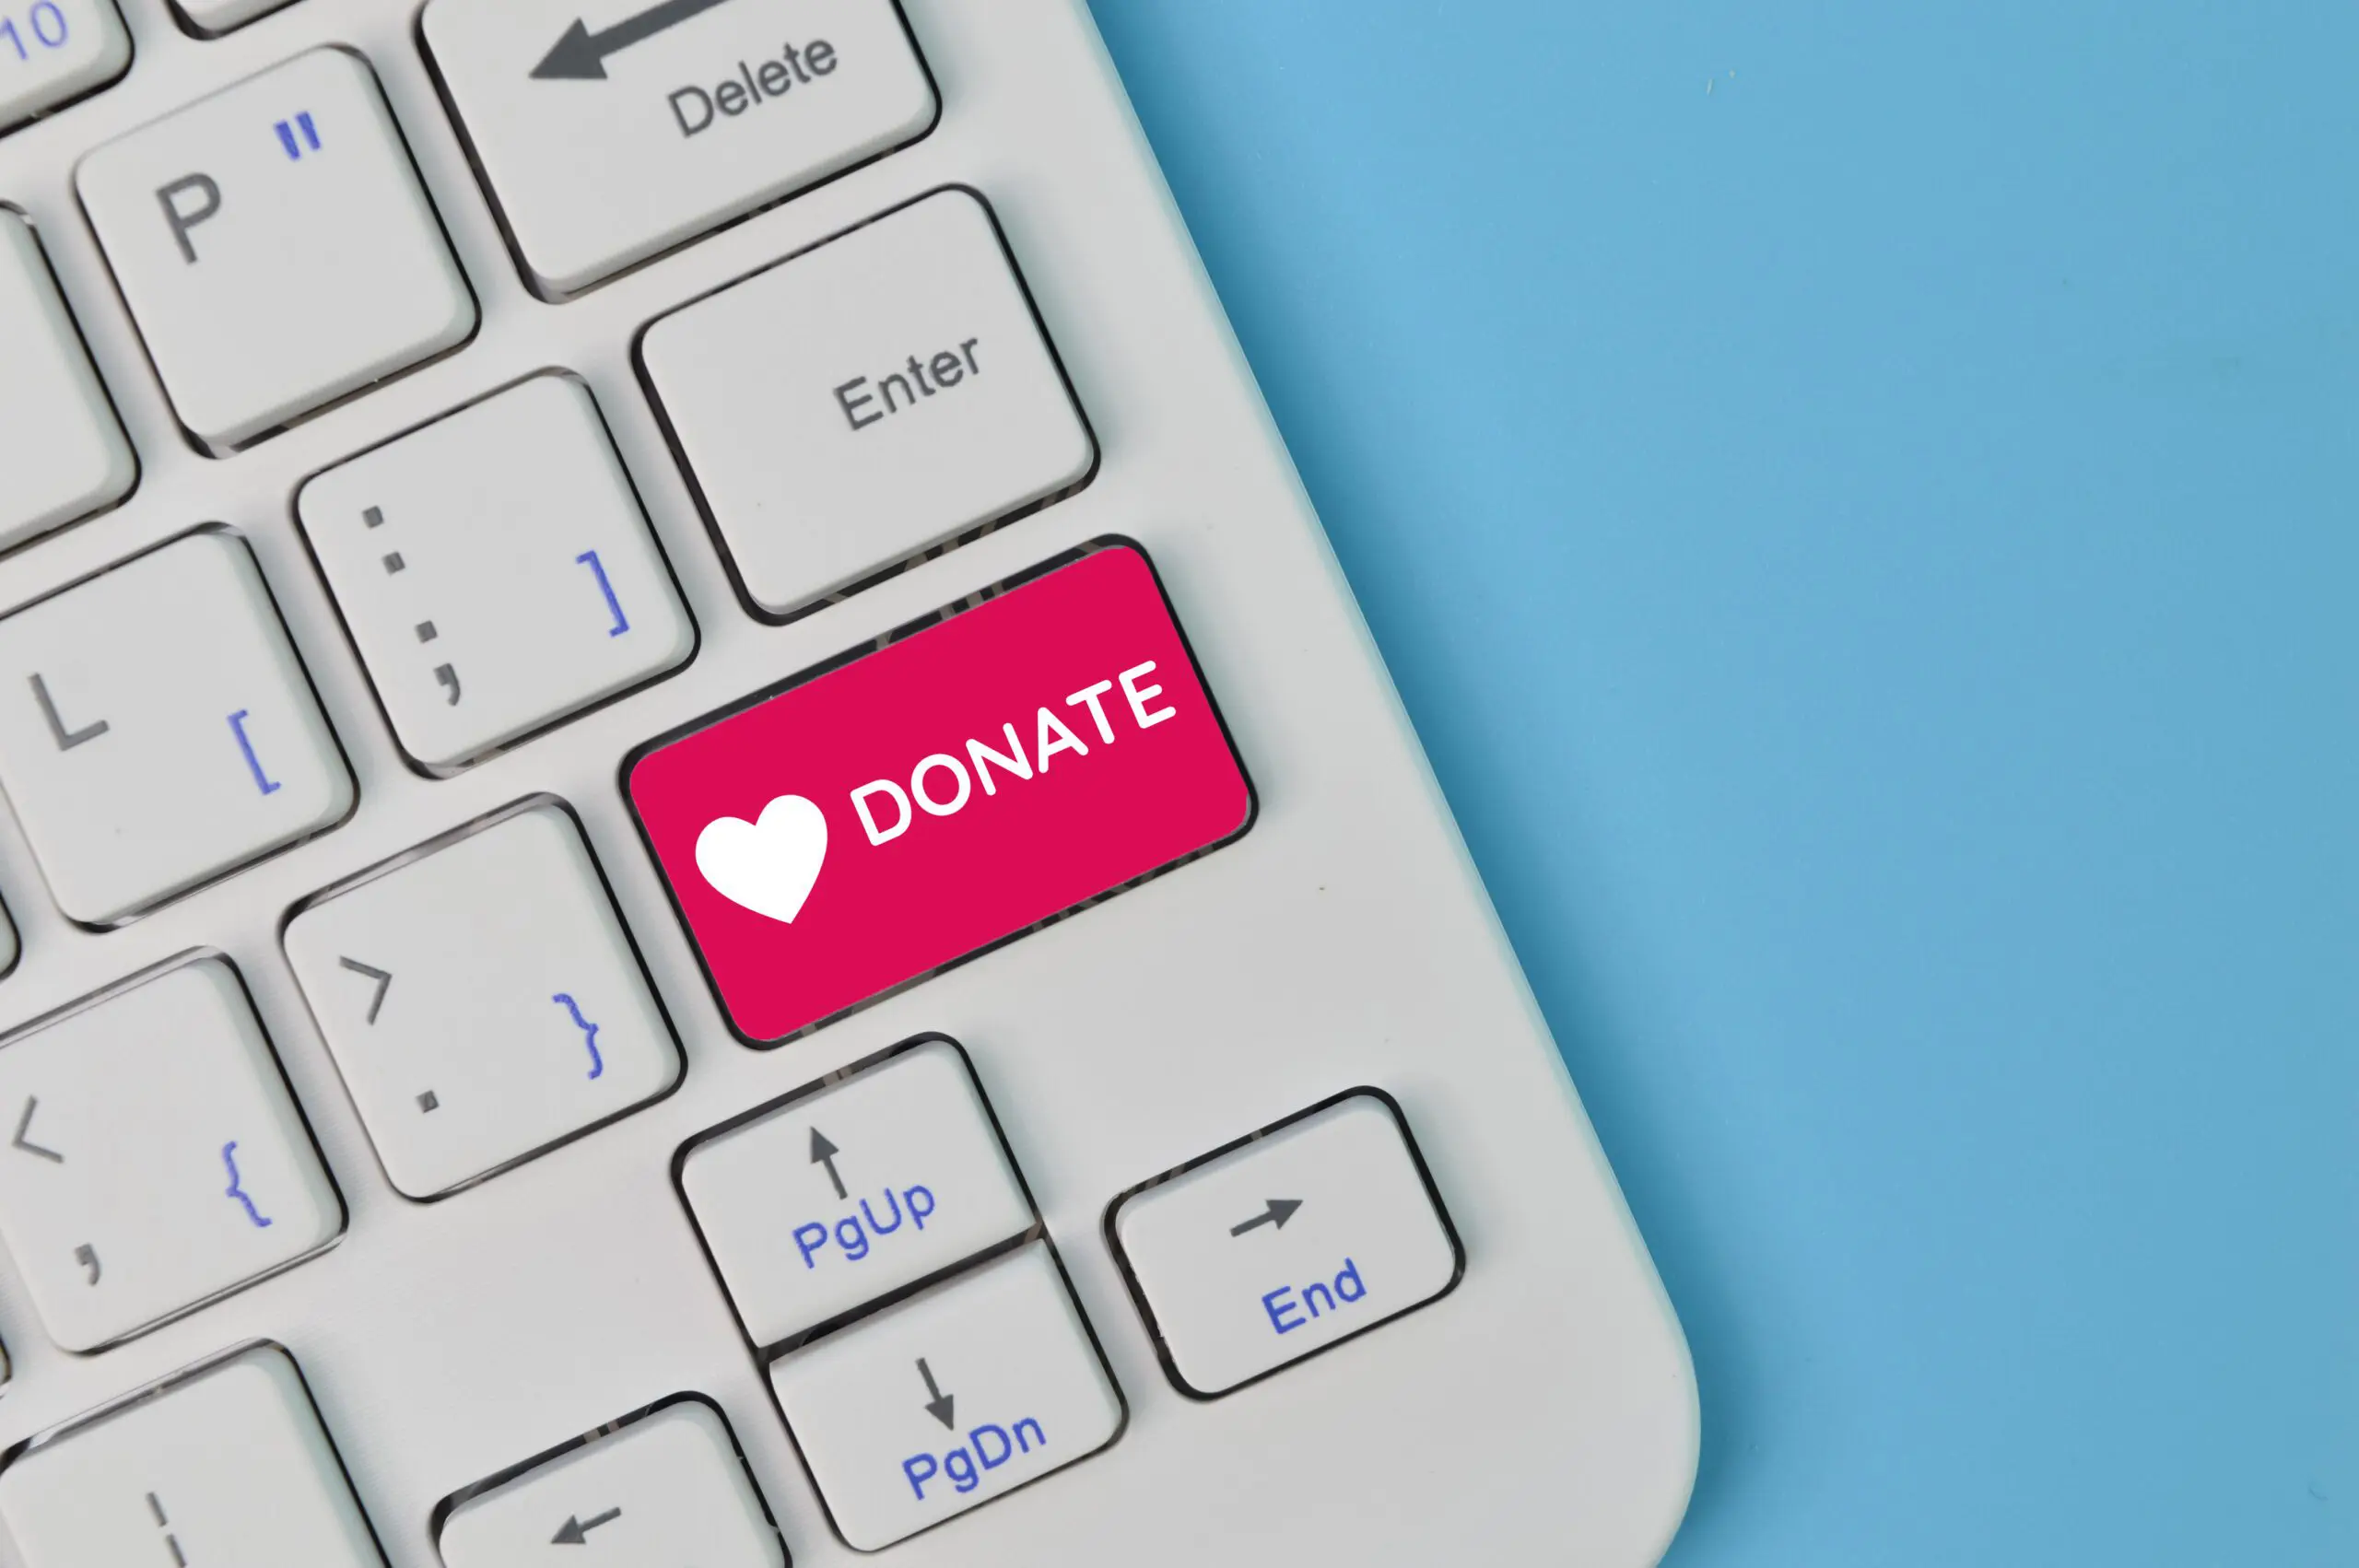 keyboard with "donate button" in pink